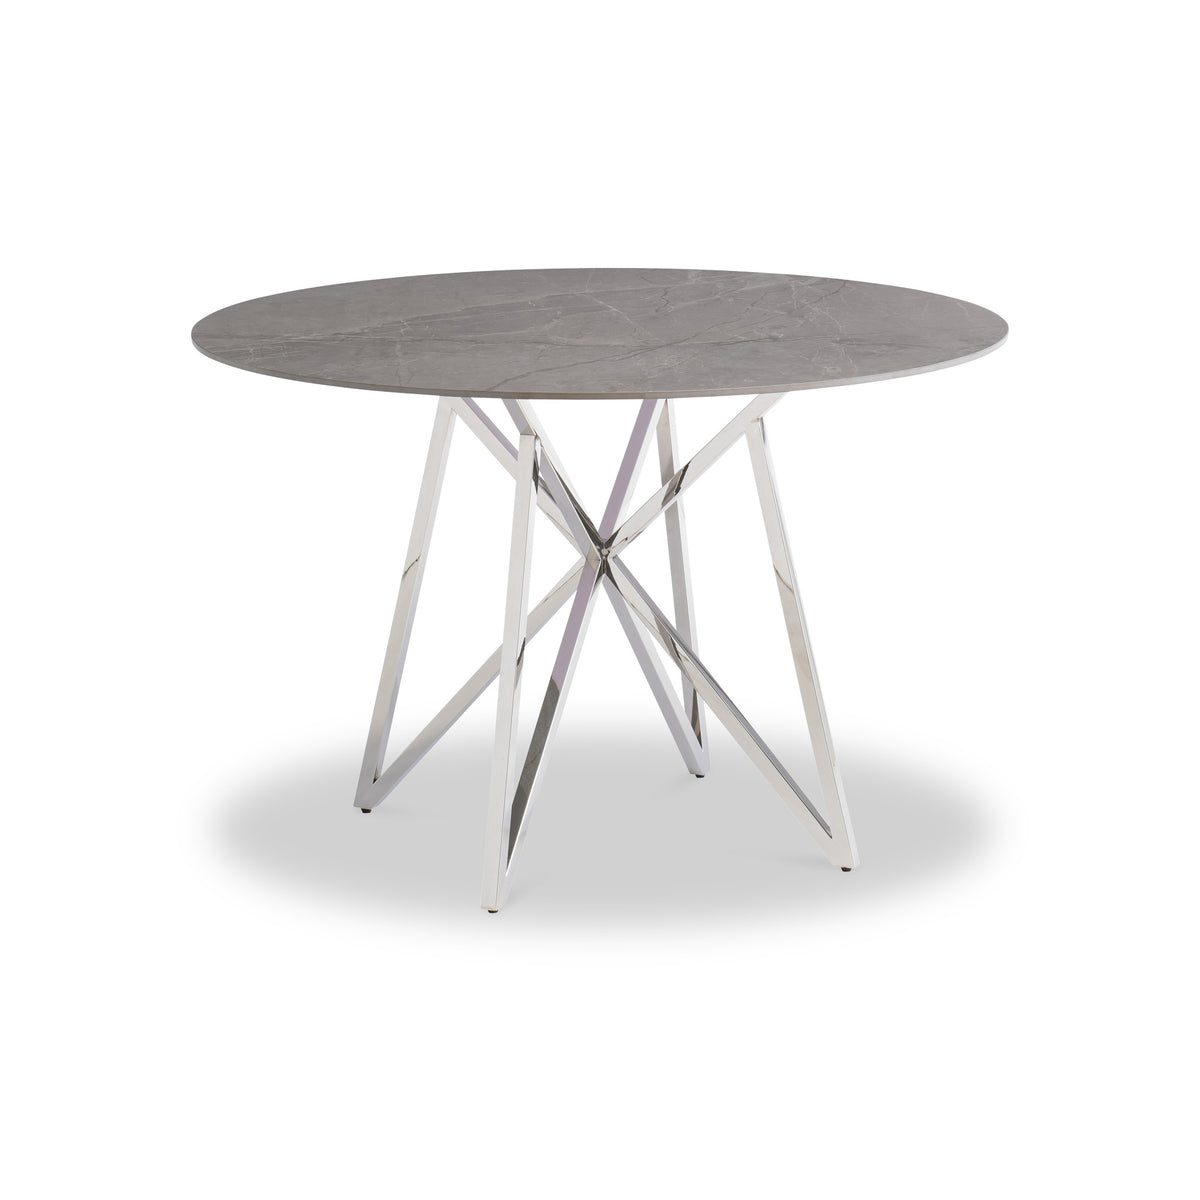 Carla Grey 1.2m Round Dining Table from Roseland Furniture